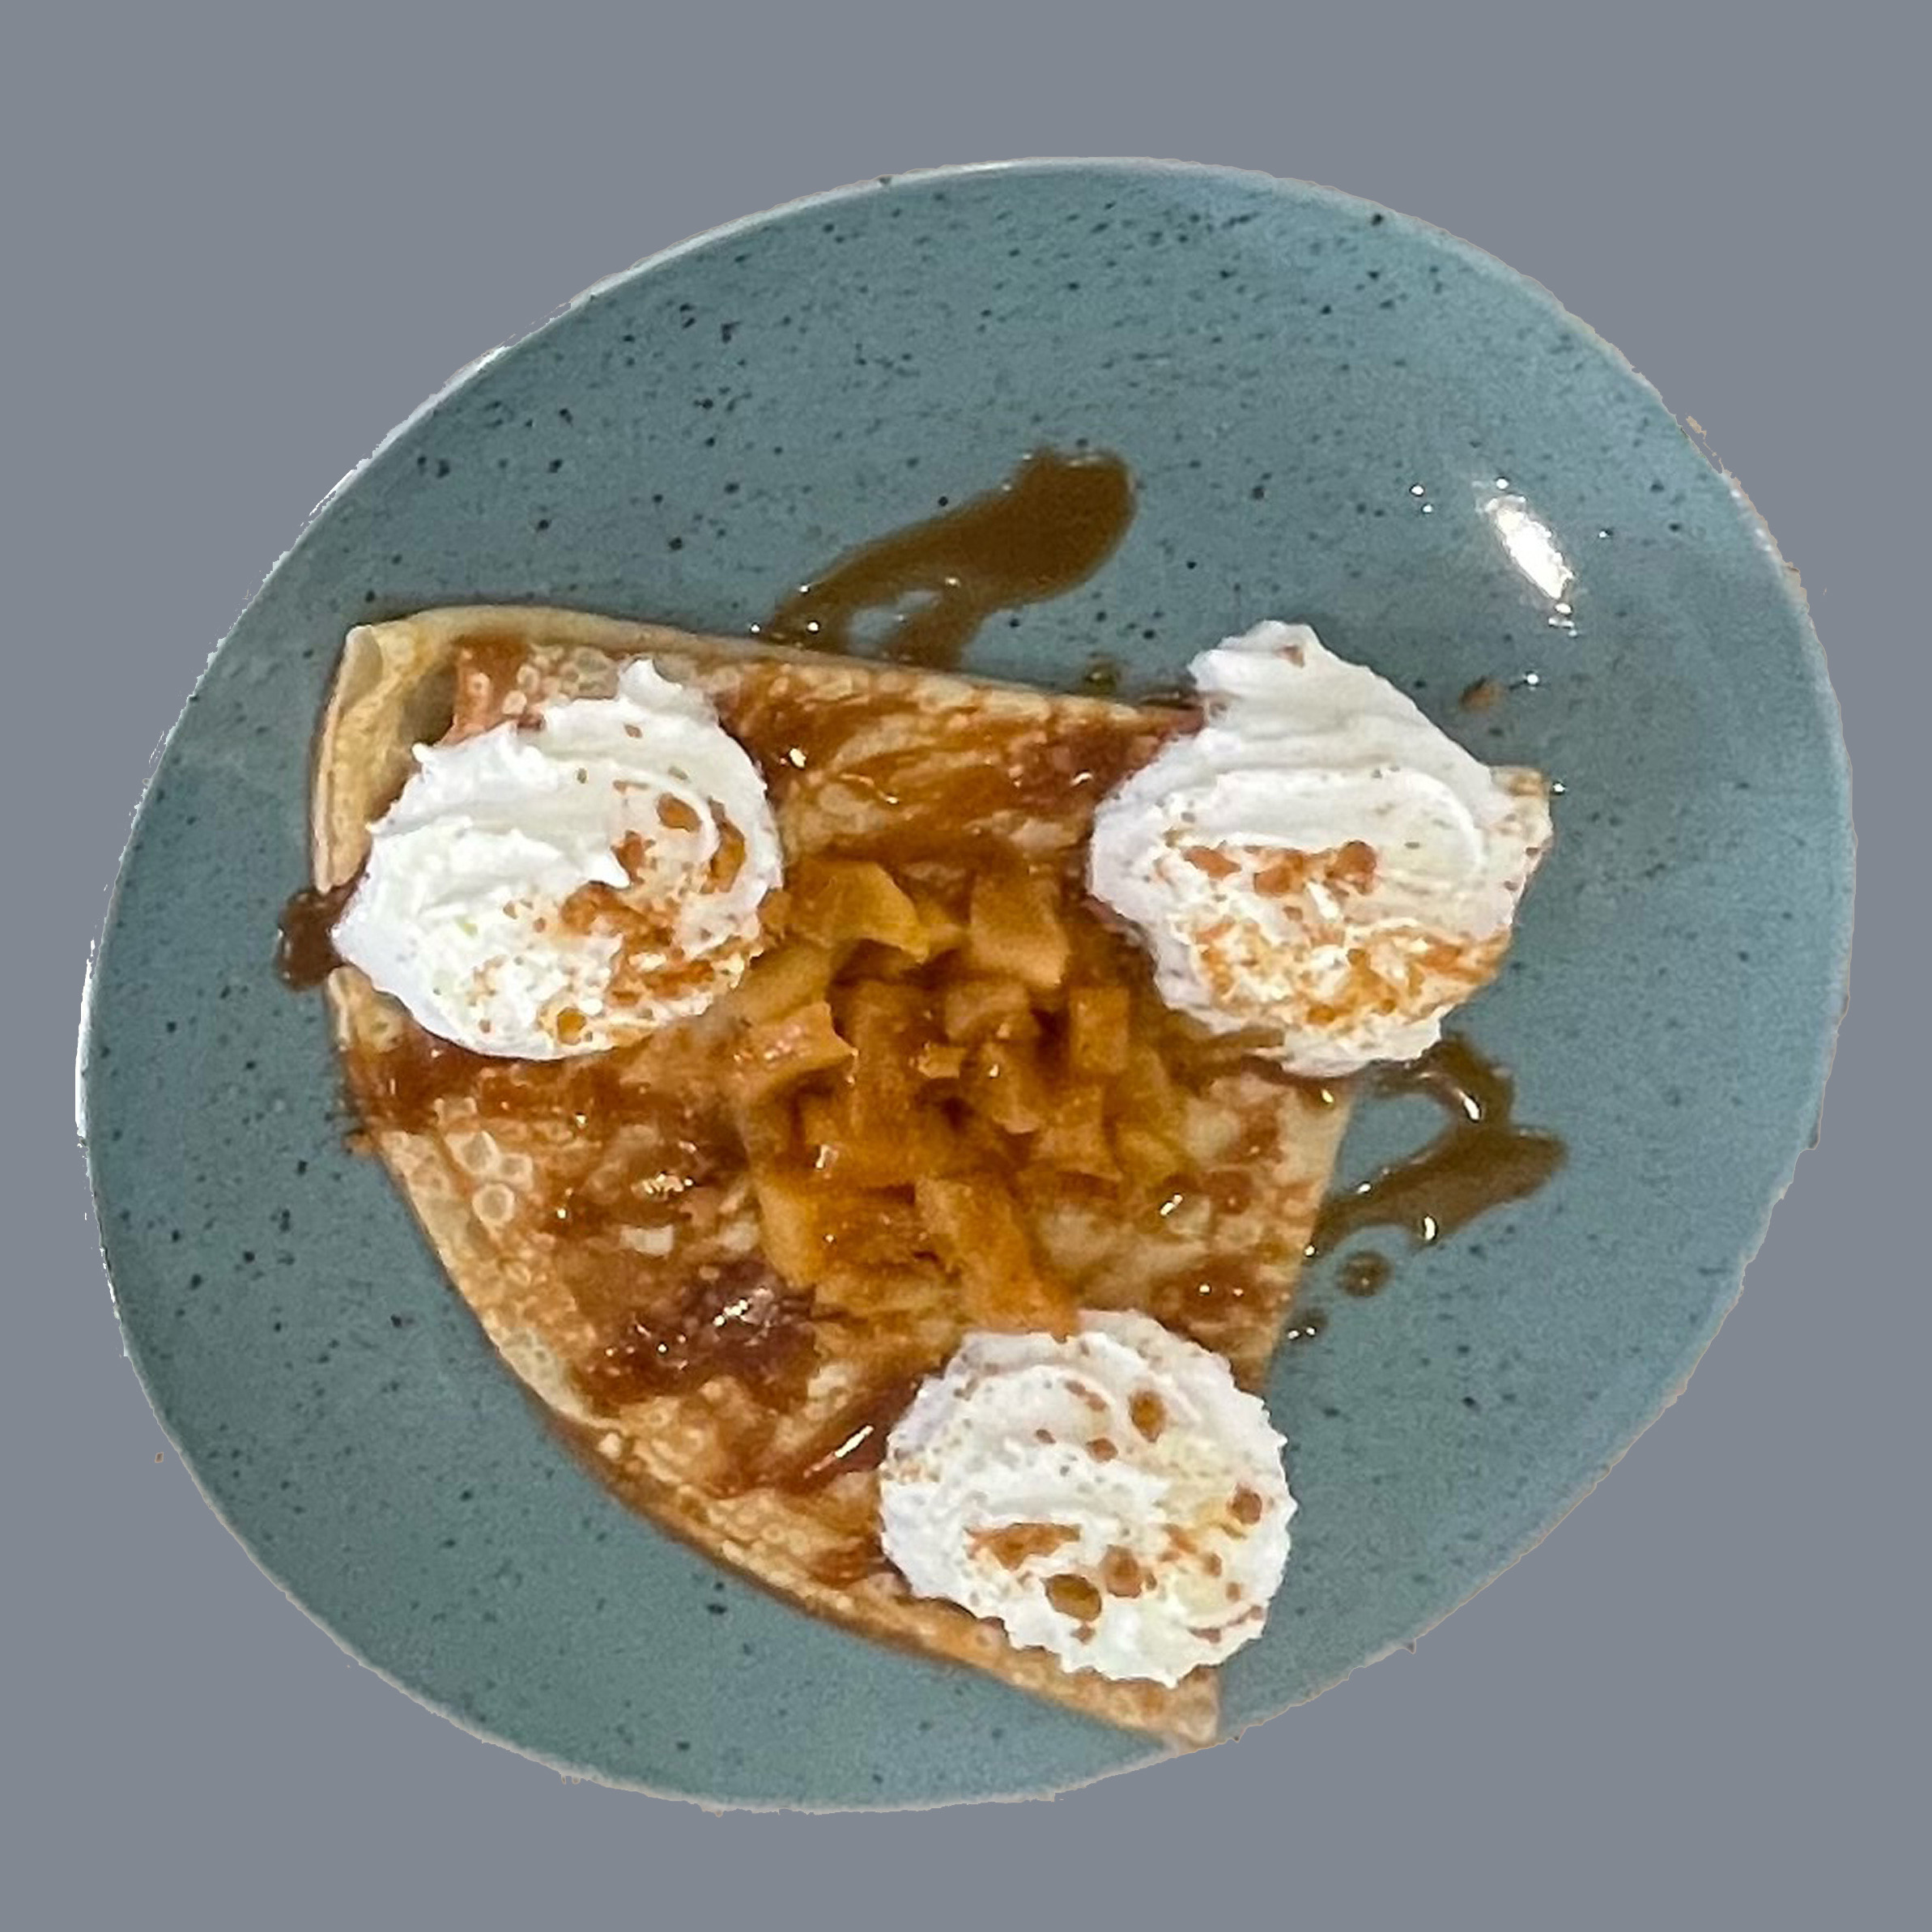 Pancake with Cooked apple, salted home made caramel, whipped cream, speculoos